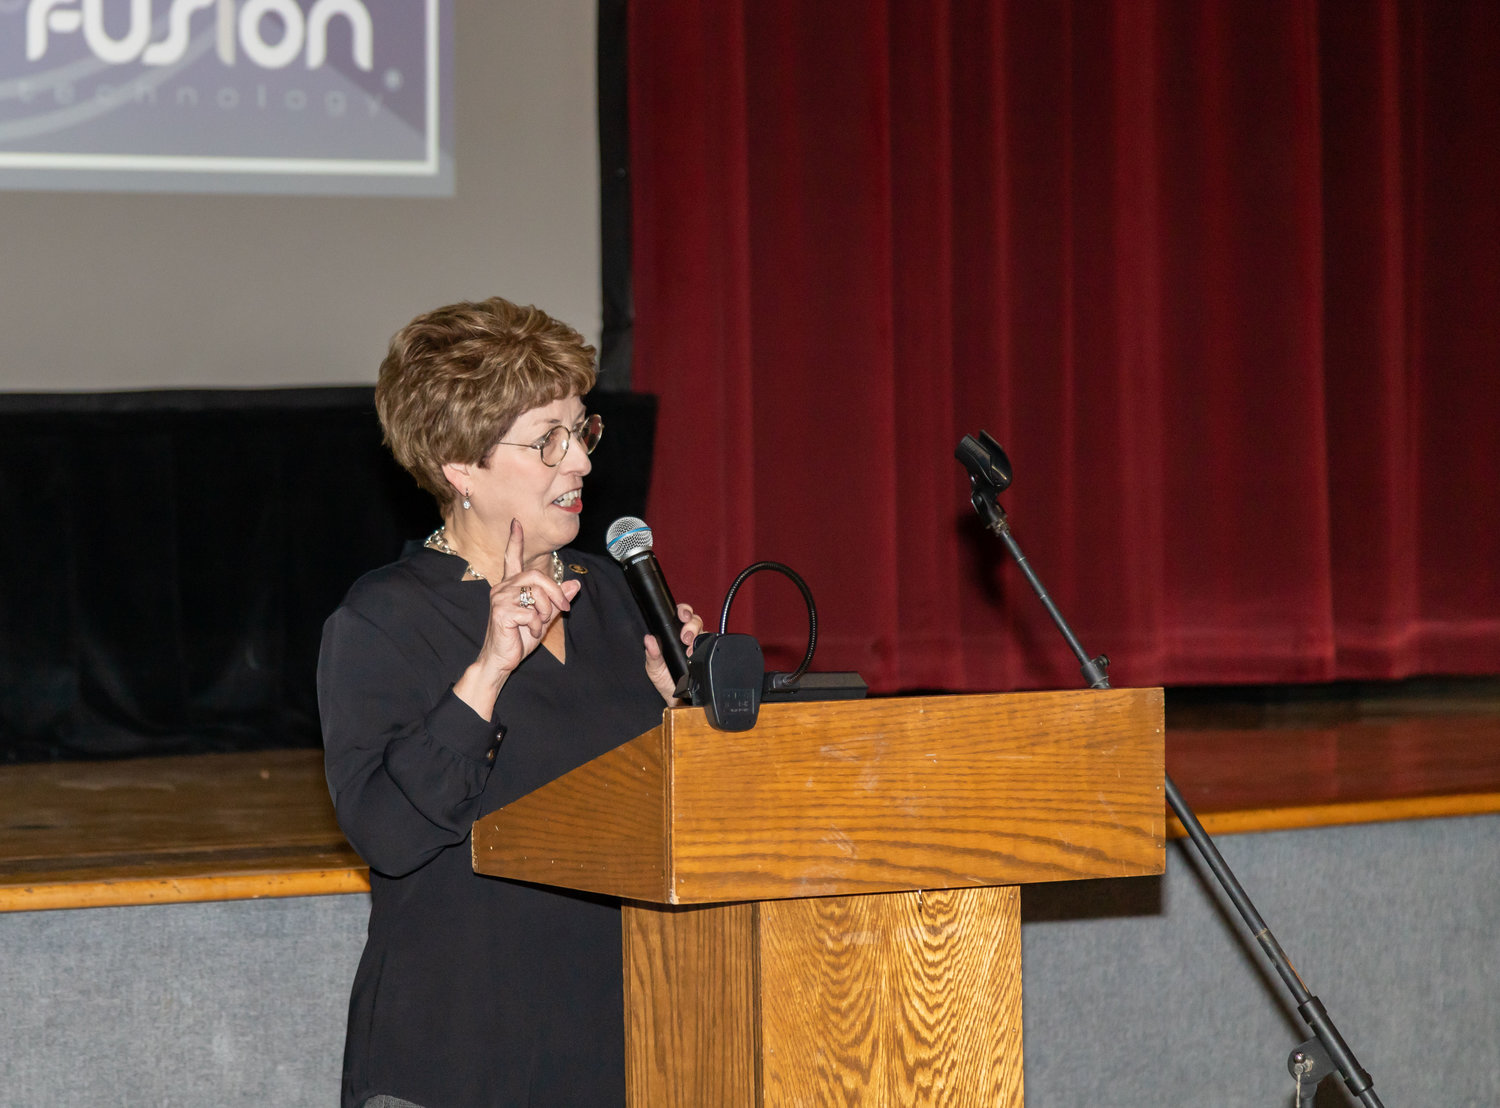 Missouri State Senator Cindy O'Laughlin speaks during Wednesday's State of the Community luncheon hosted by the Moberly Area Chamber of Commerce.